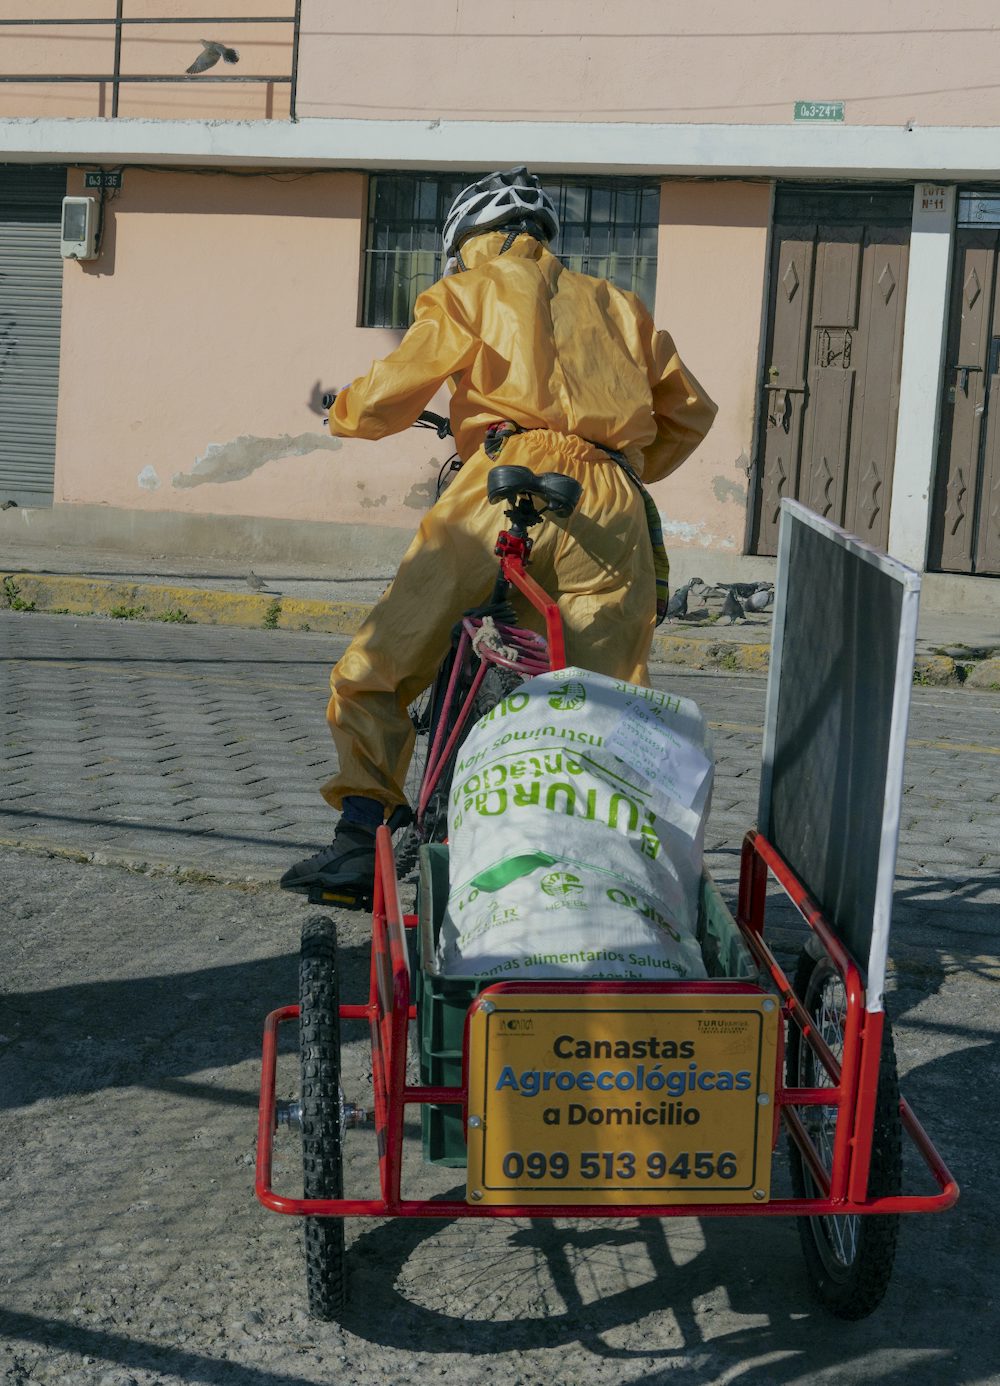 A man in wearing protective equipment delivers bags of produce by bicycle.